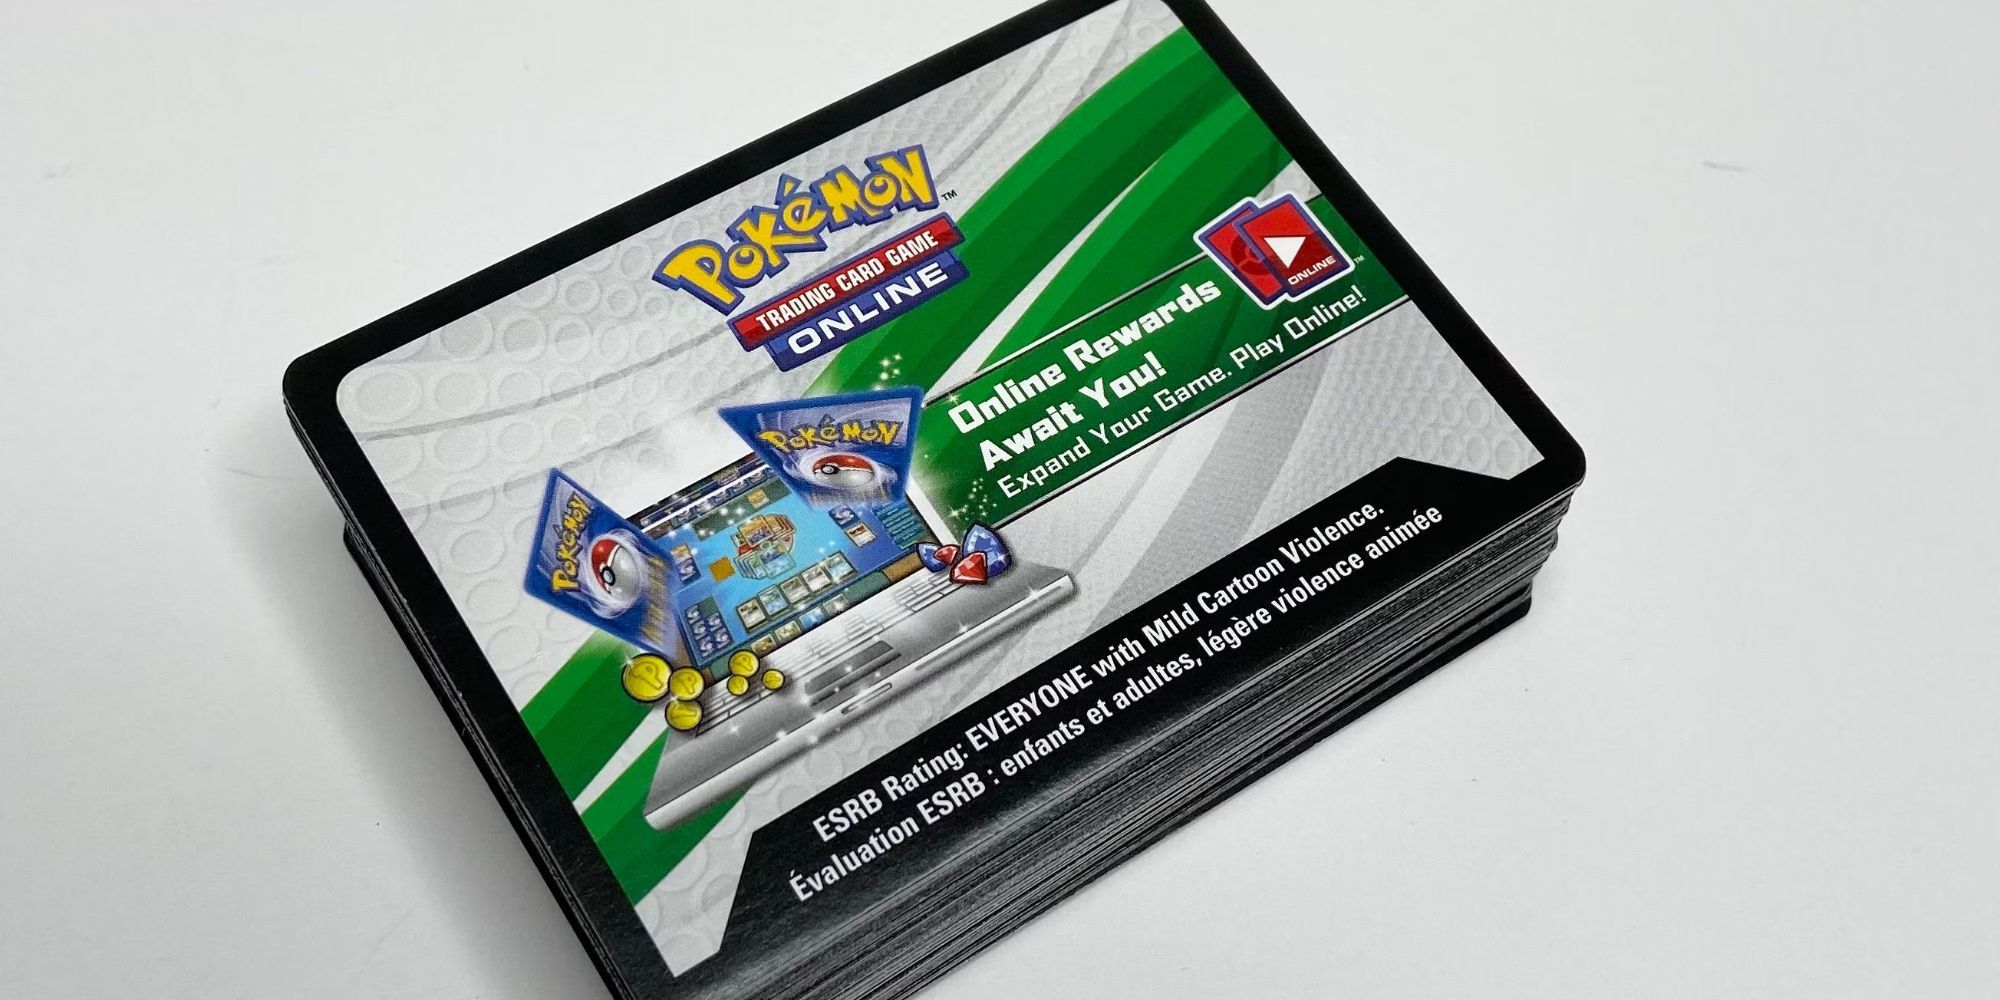 How To Redeem Code Cards In Pokemon TCG Live